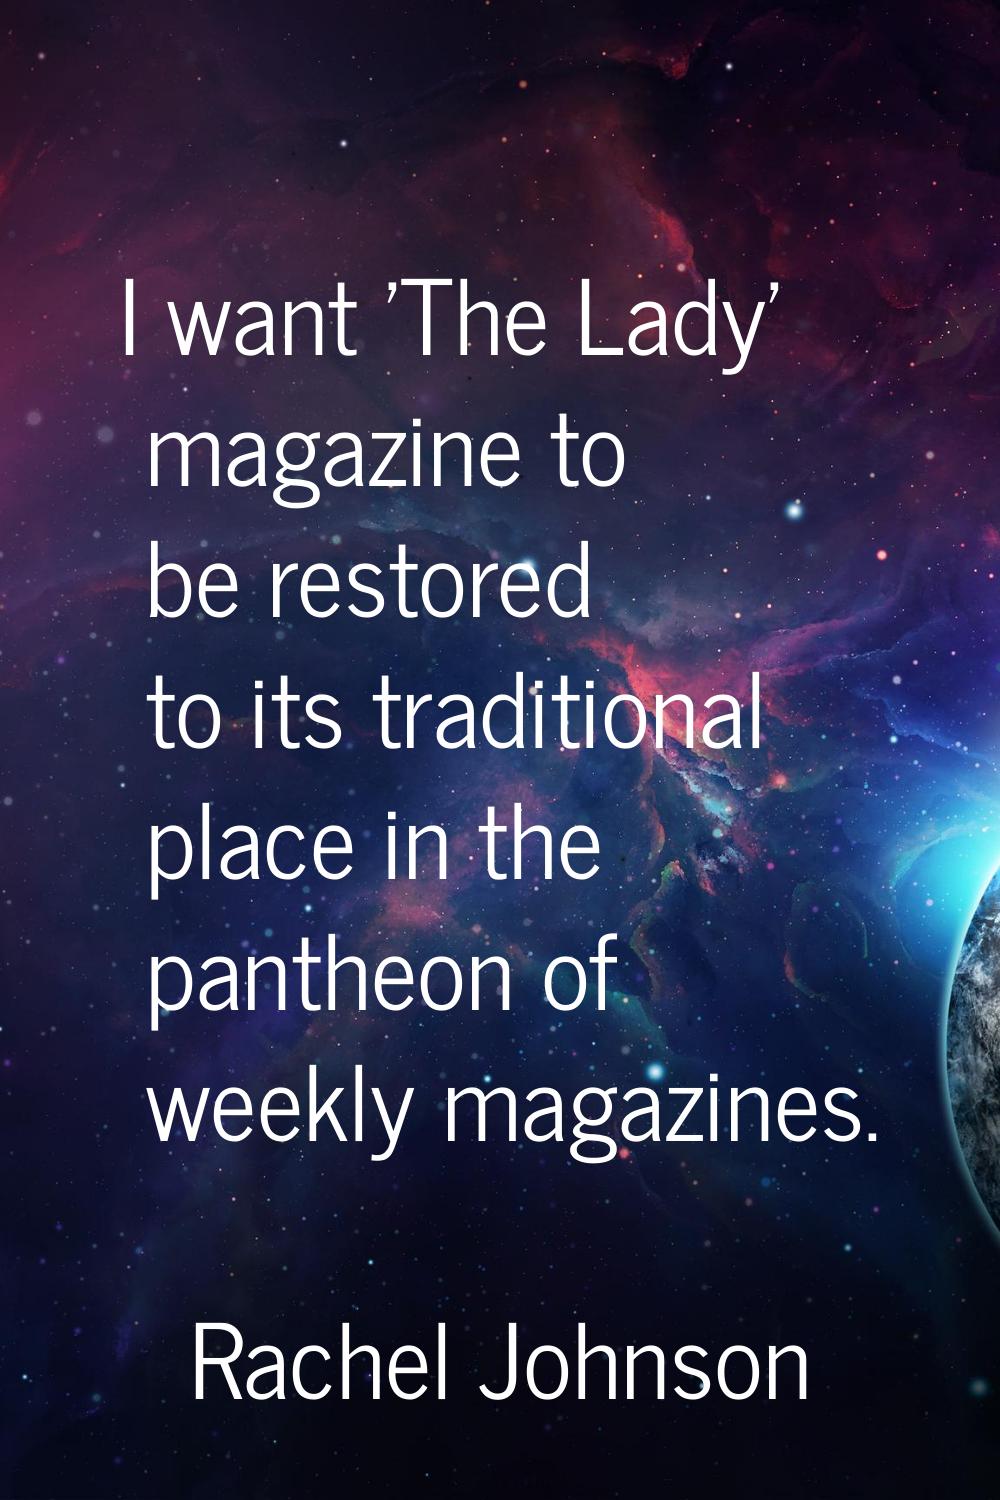 I want 'The Lady' magazine to be restored to its traditional place in the pantheon of weekly magazi